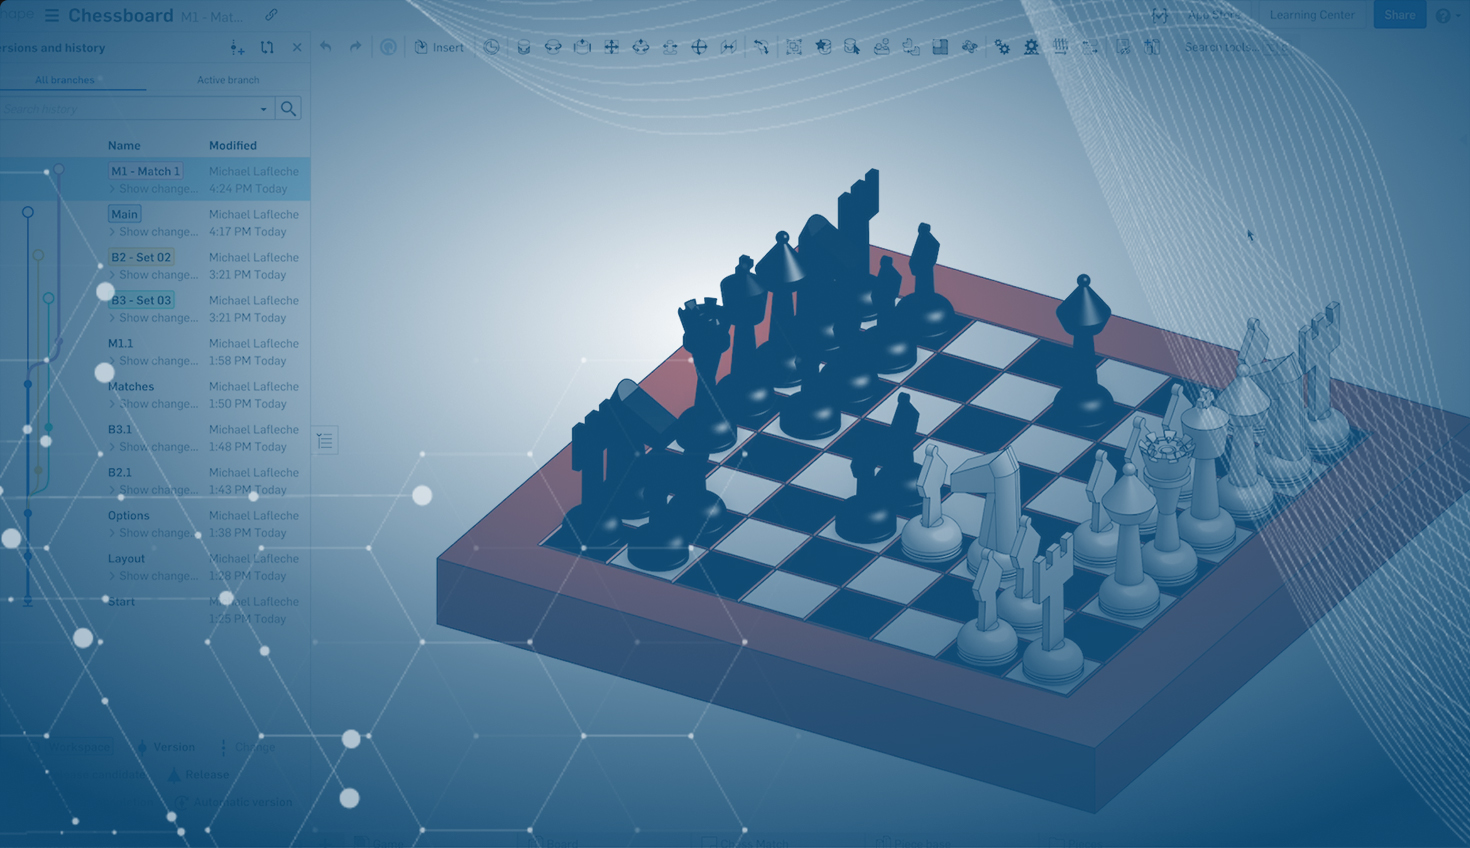 Cyber-Chess - Apps on Google Play